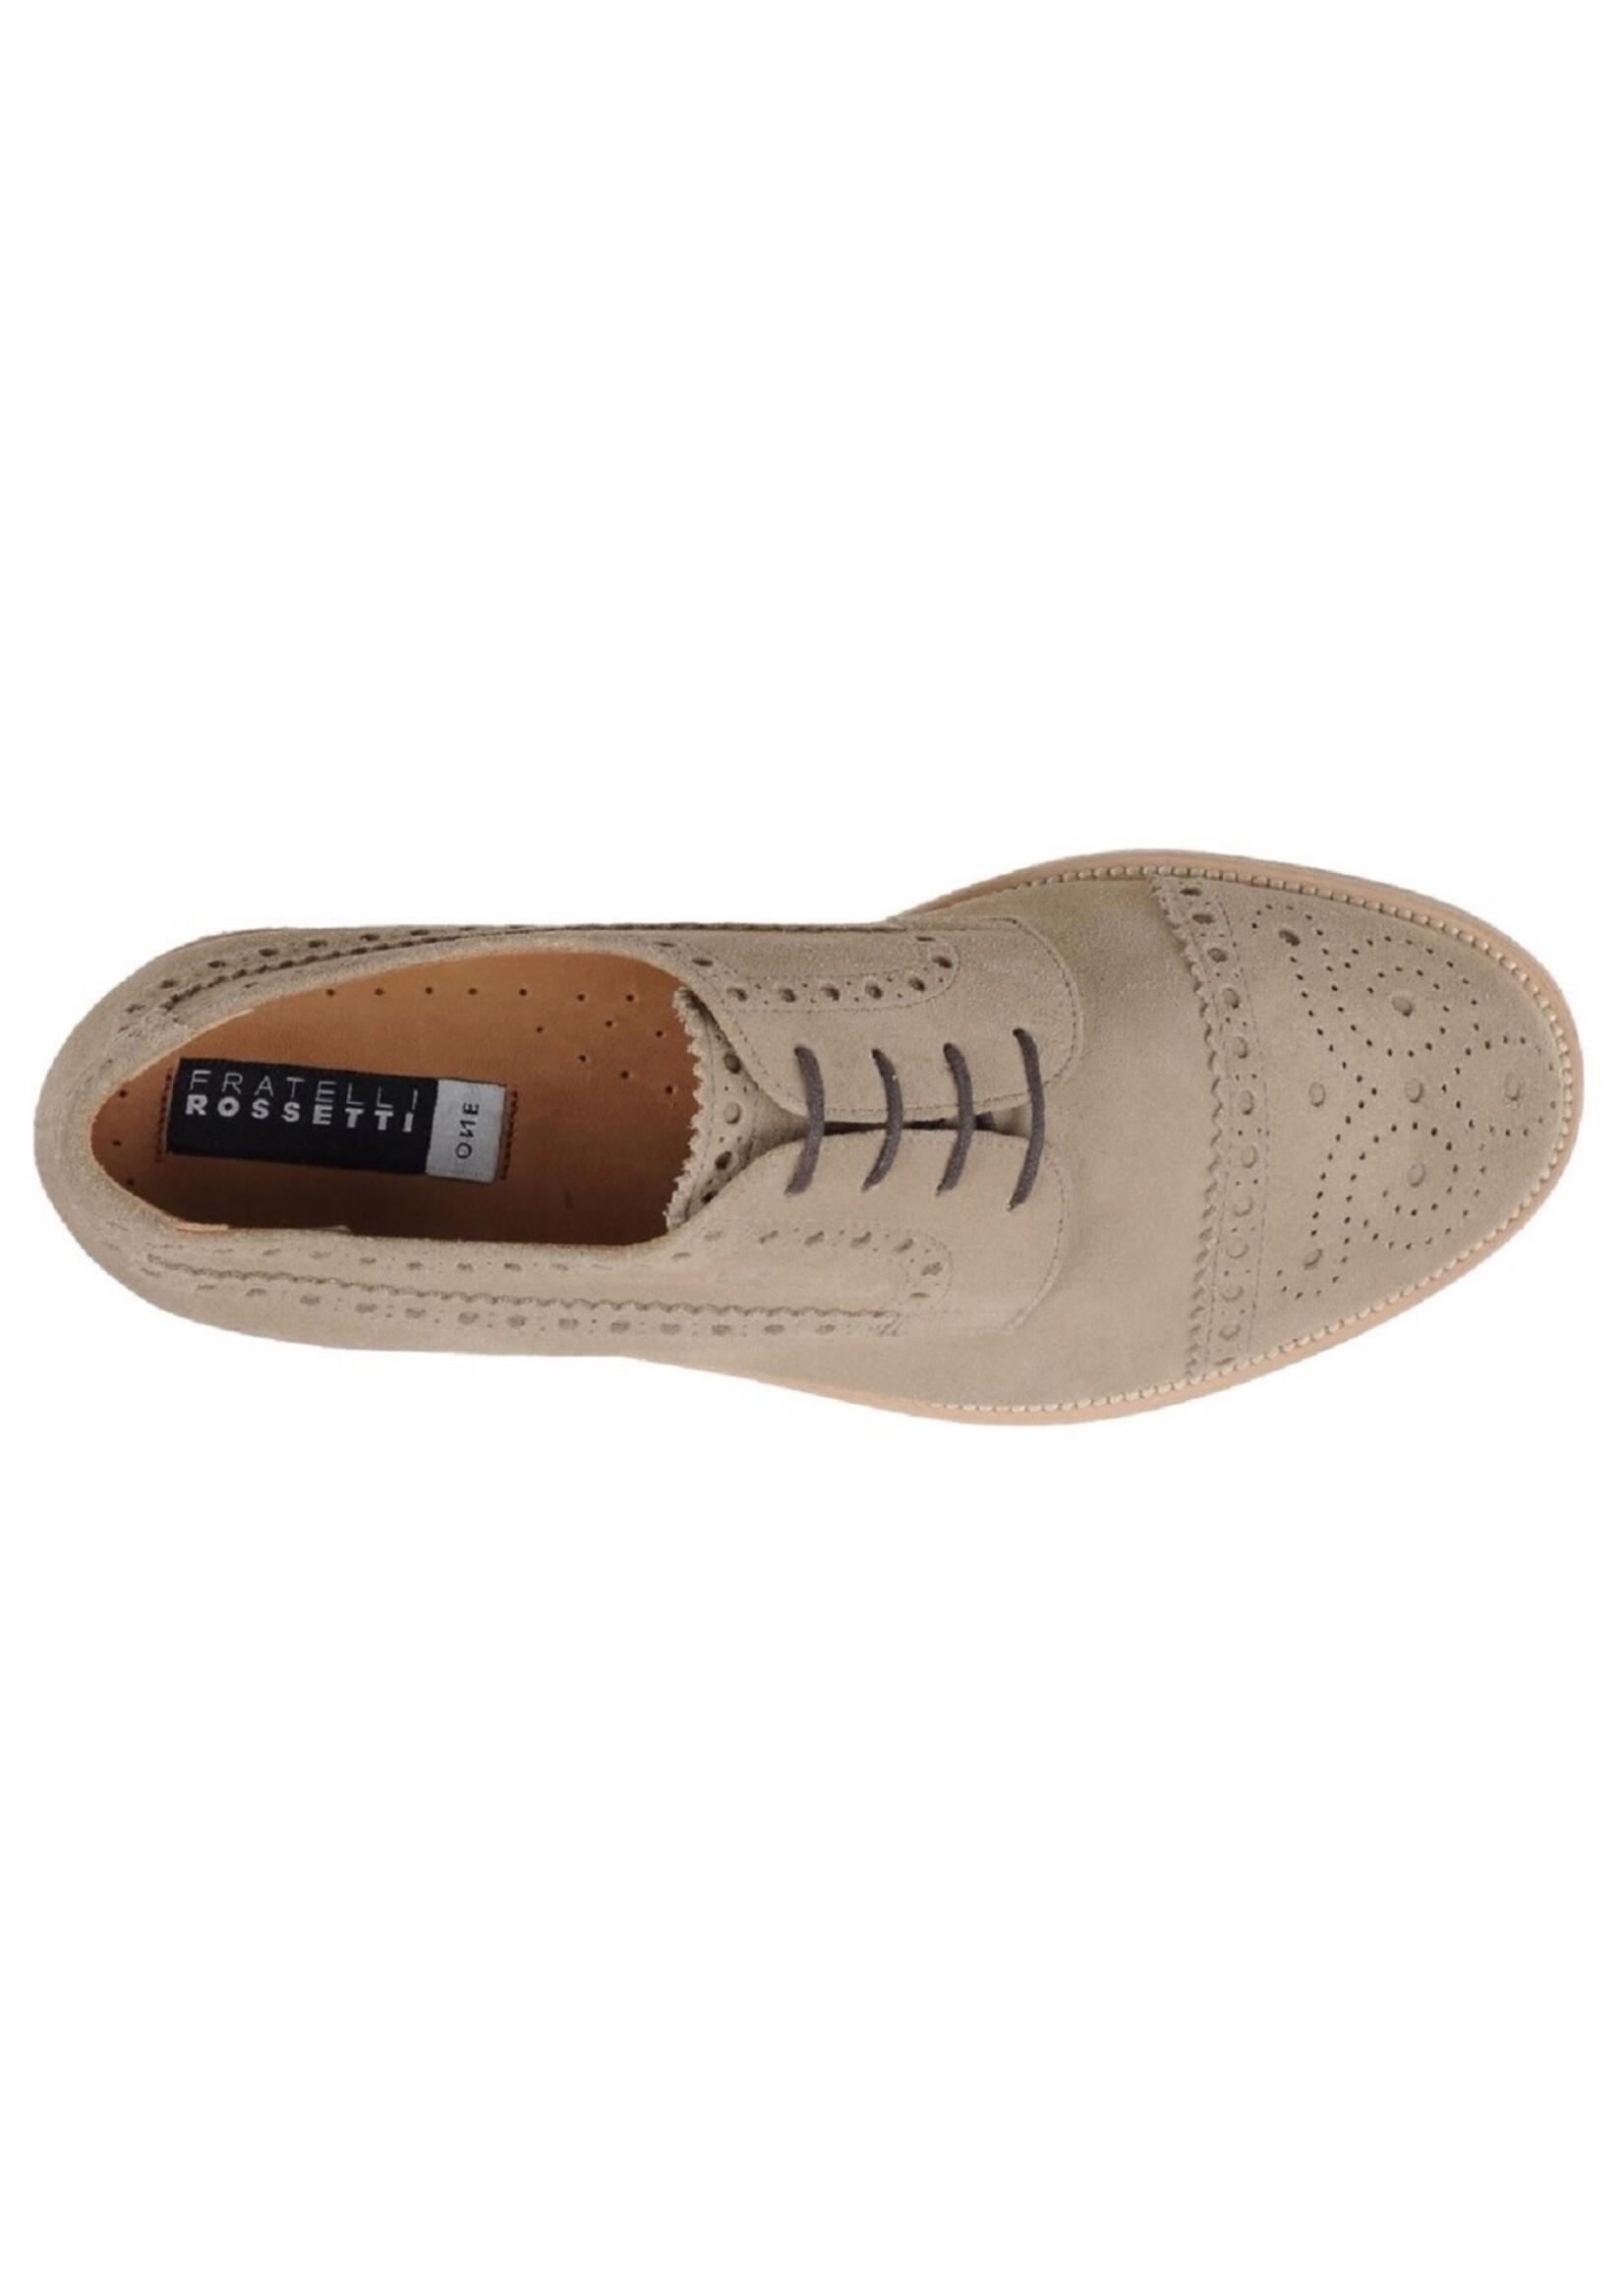 Fratelli Rossetti Taupe Leater Lace-up Shoes, 13